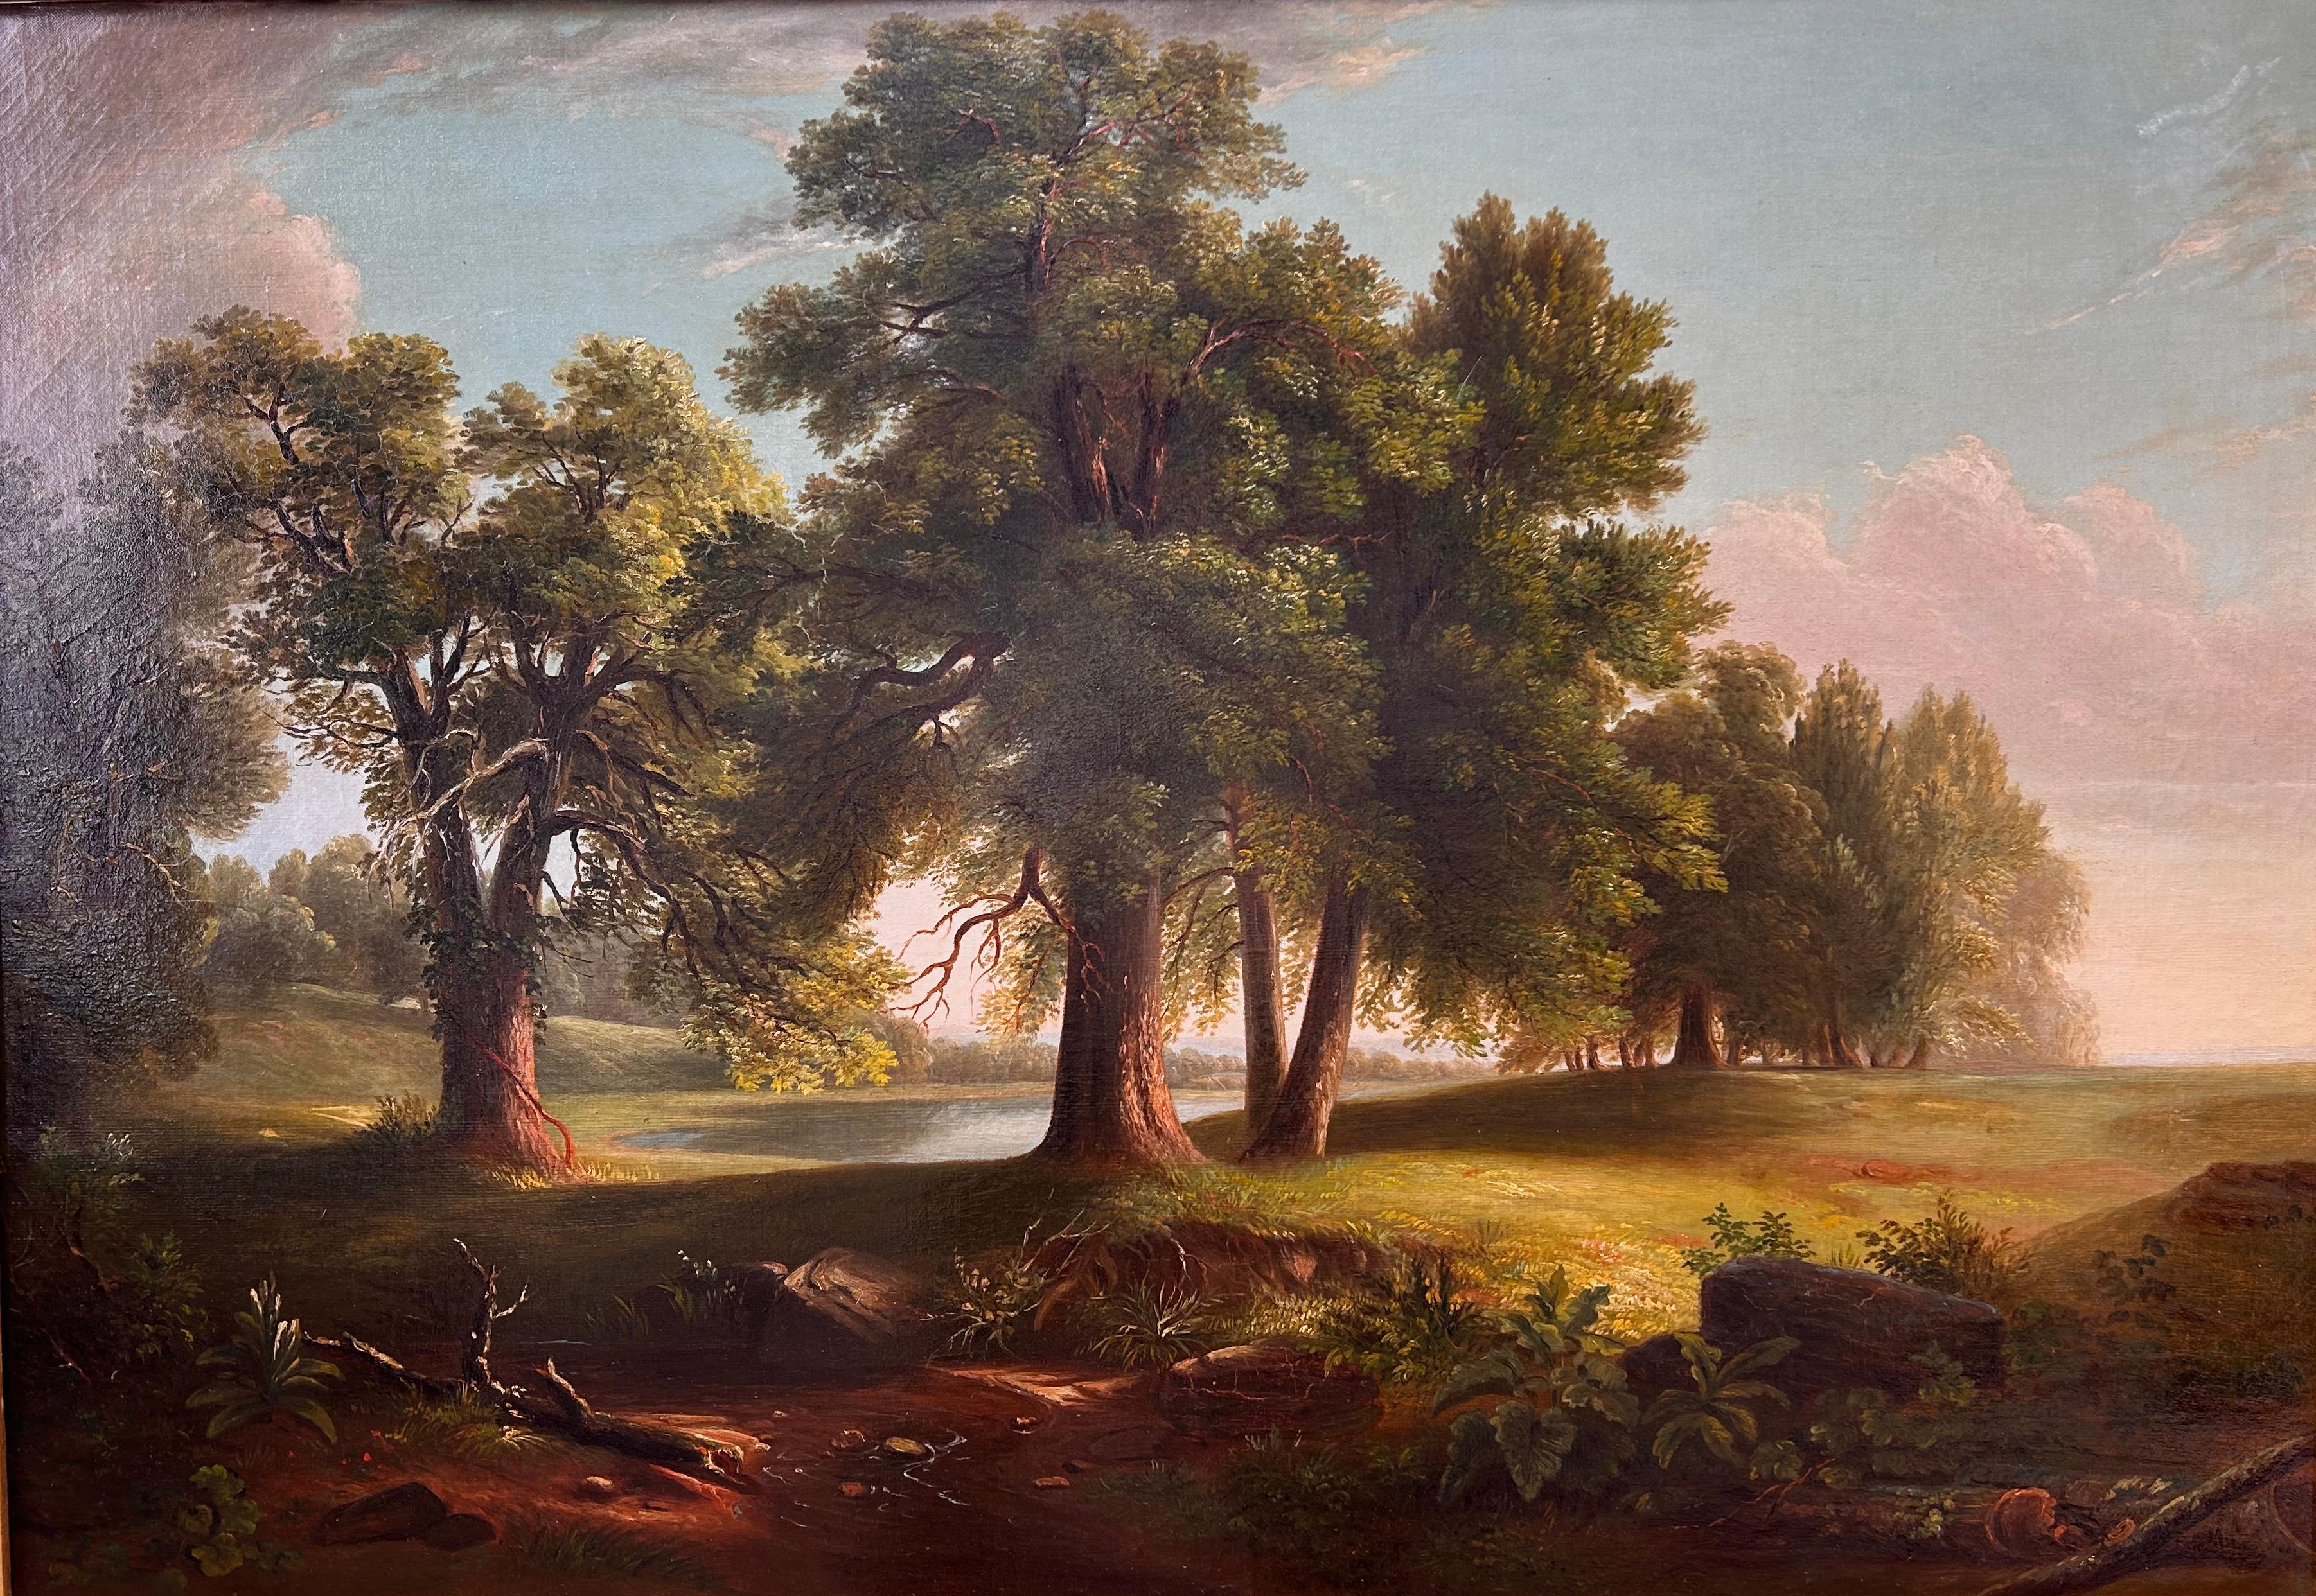 Landscape - Painting by Asher Brown Durand